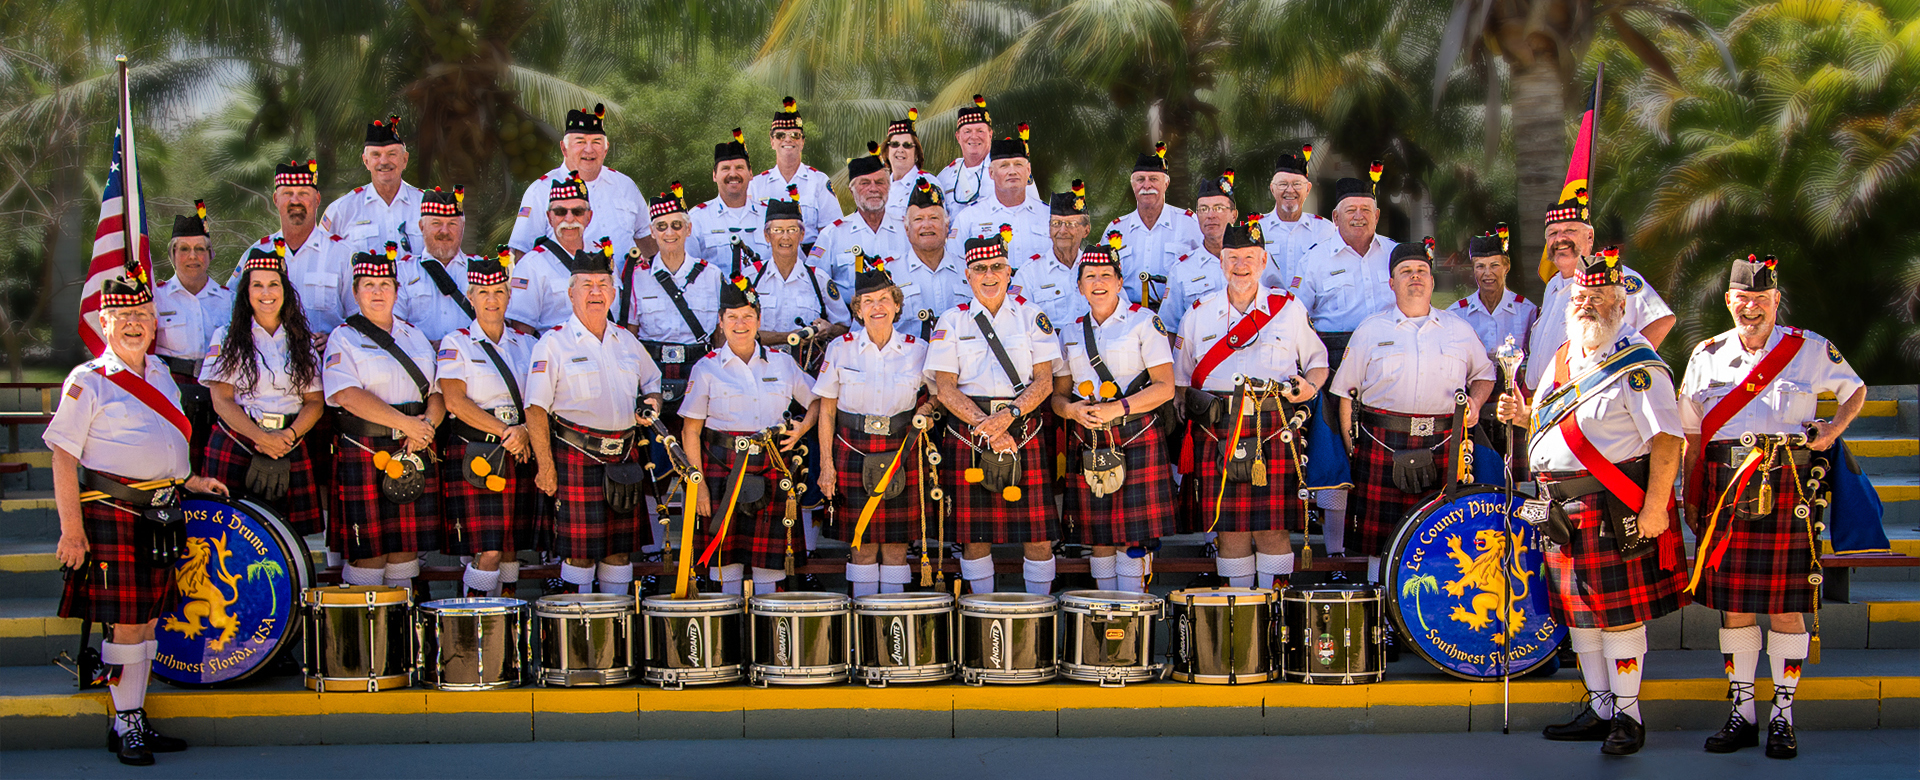 Lee County Pipes and Drums Band Photo